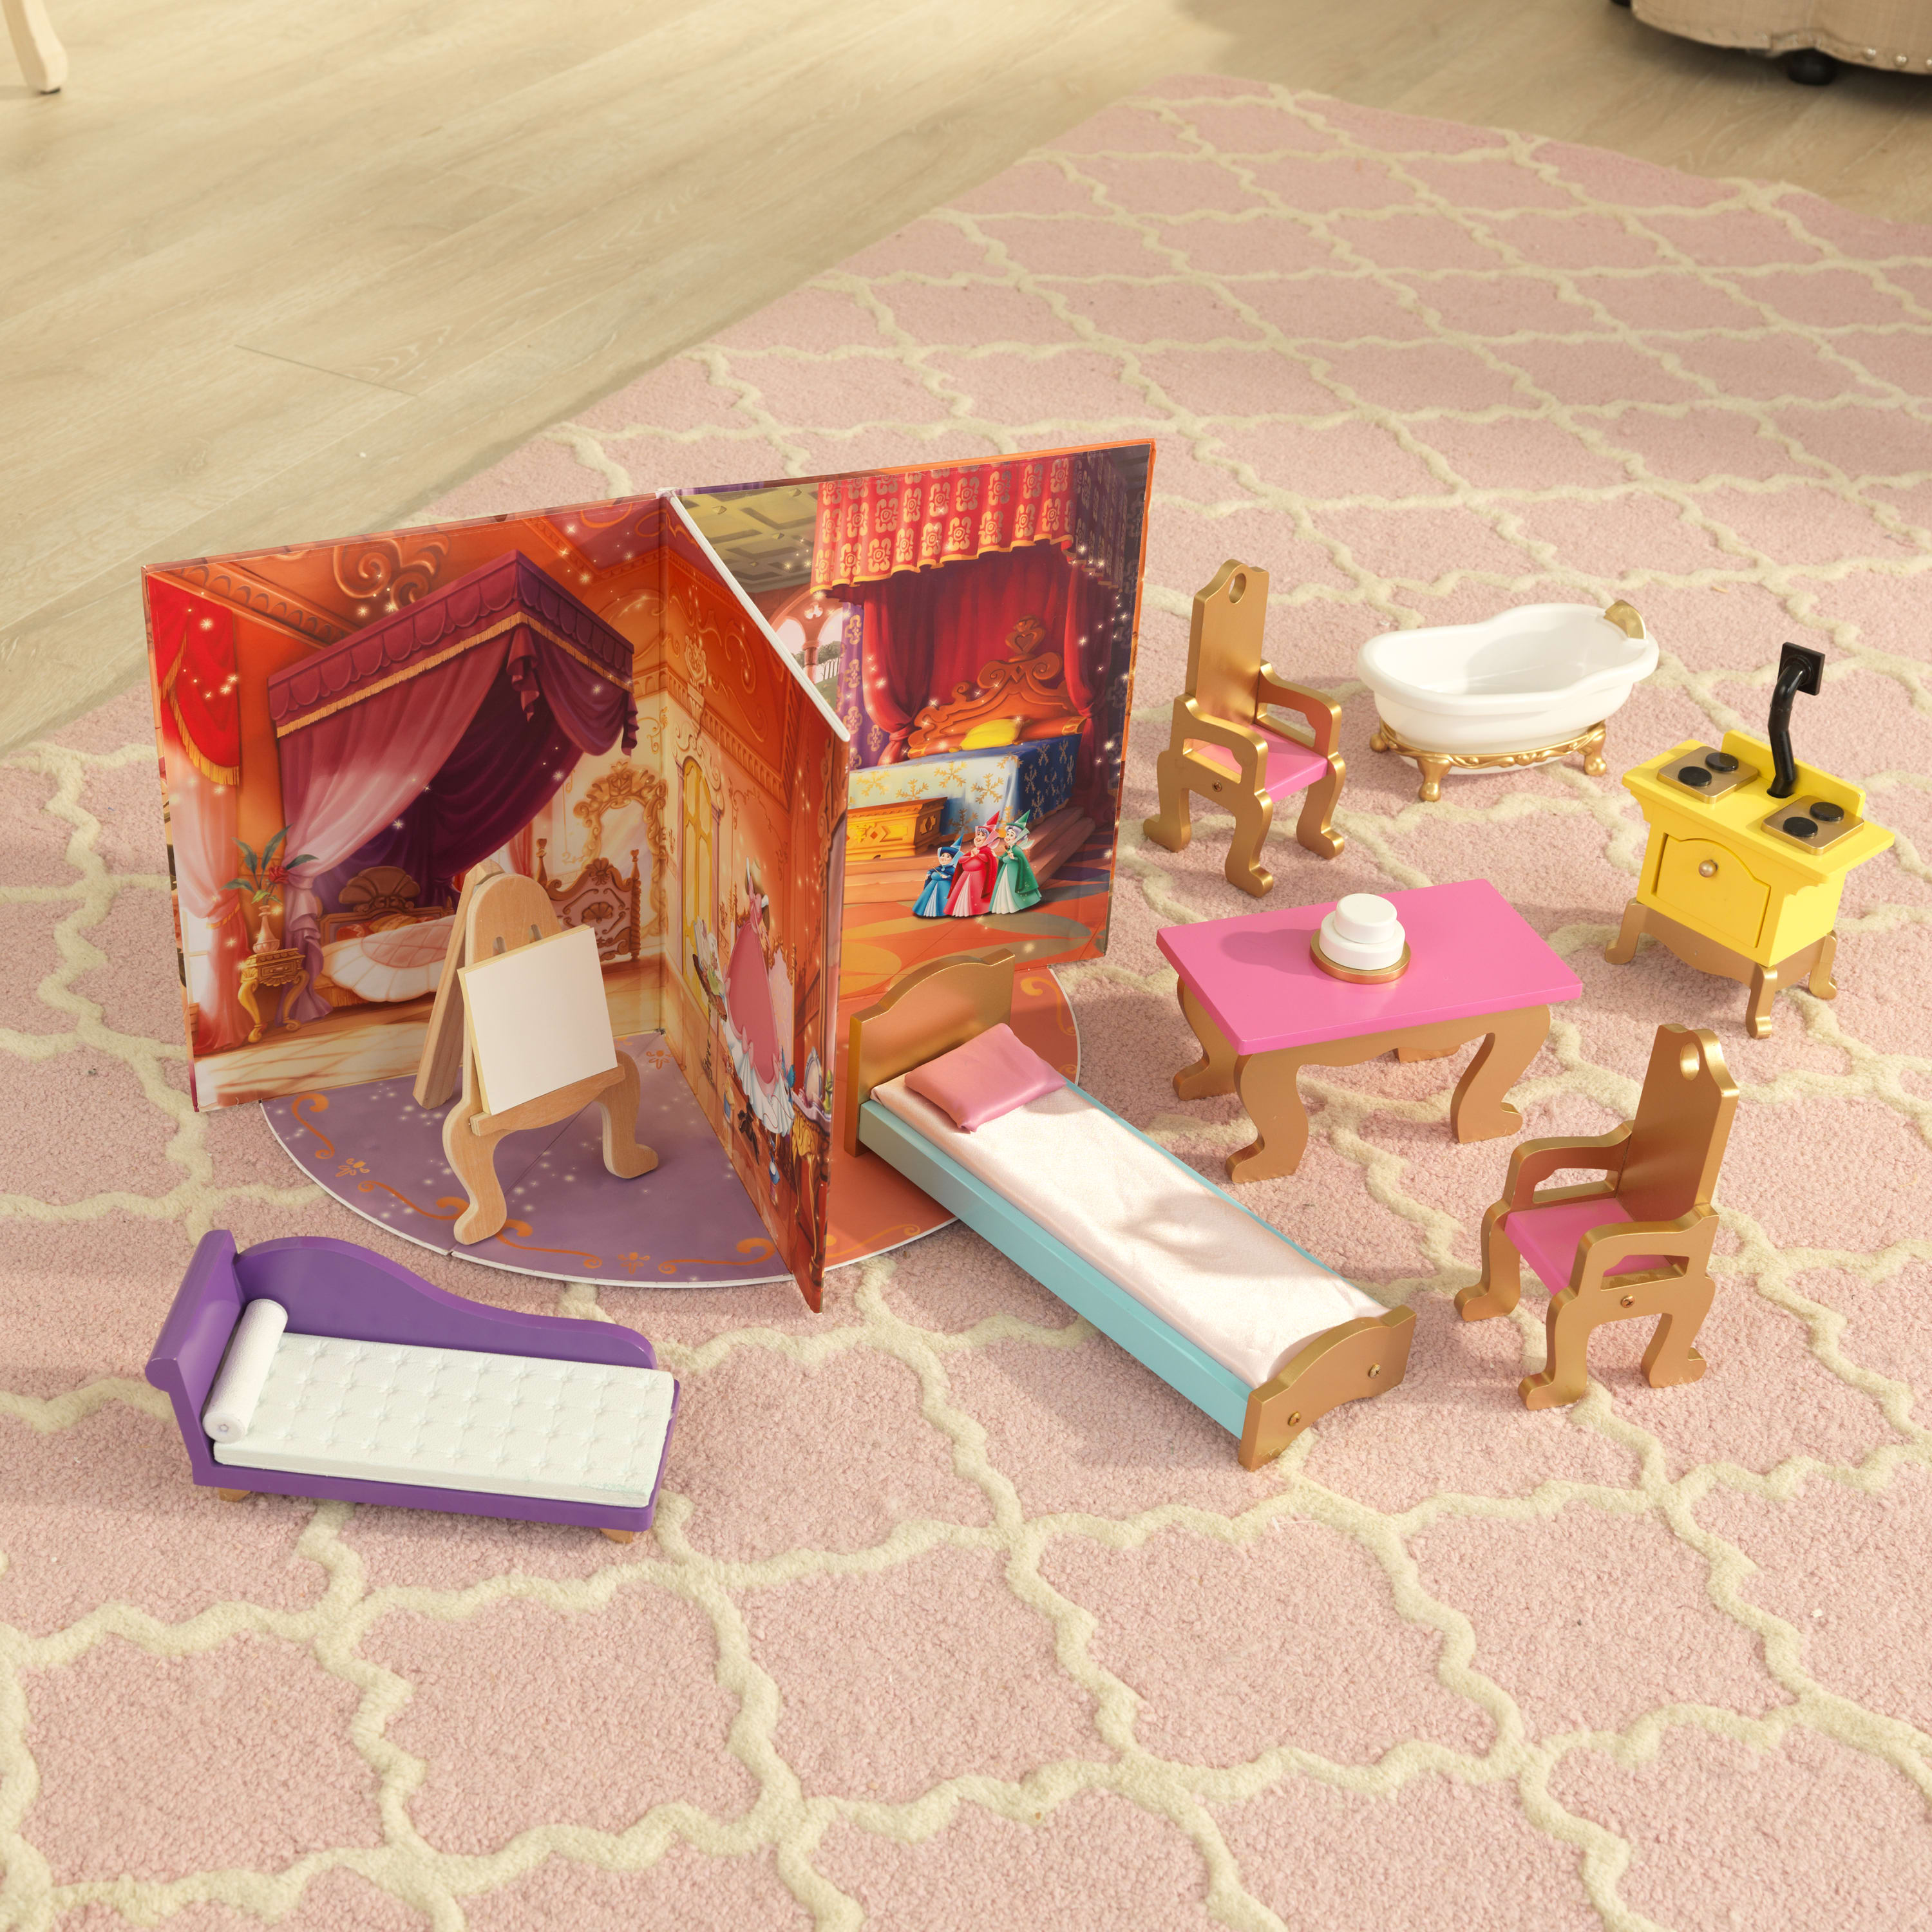 KidKraft Disney Princess Royal Celebration Wooden Castle Dollhouse with 10 Accessories - image 4 of 10